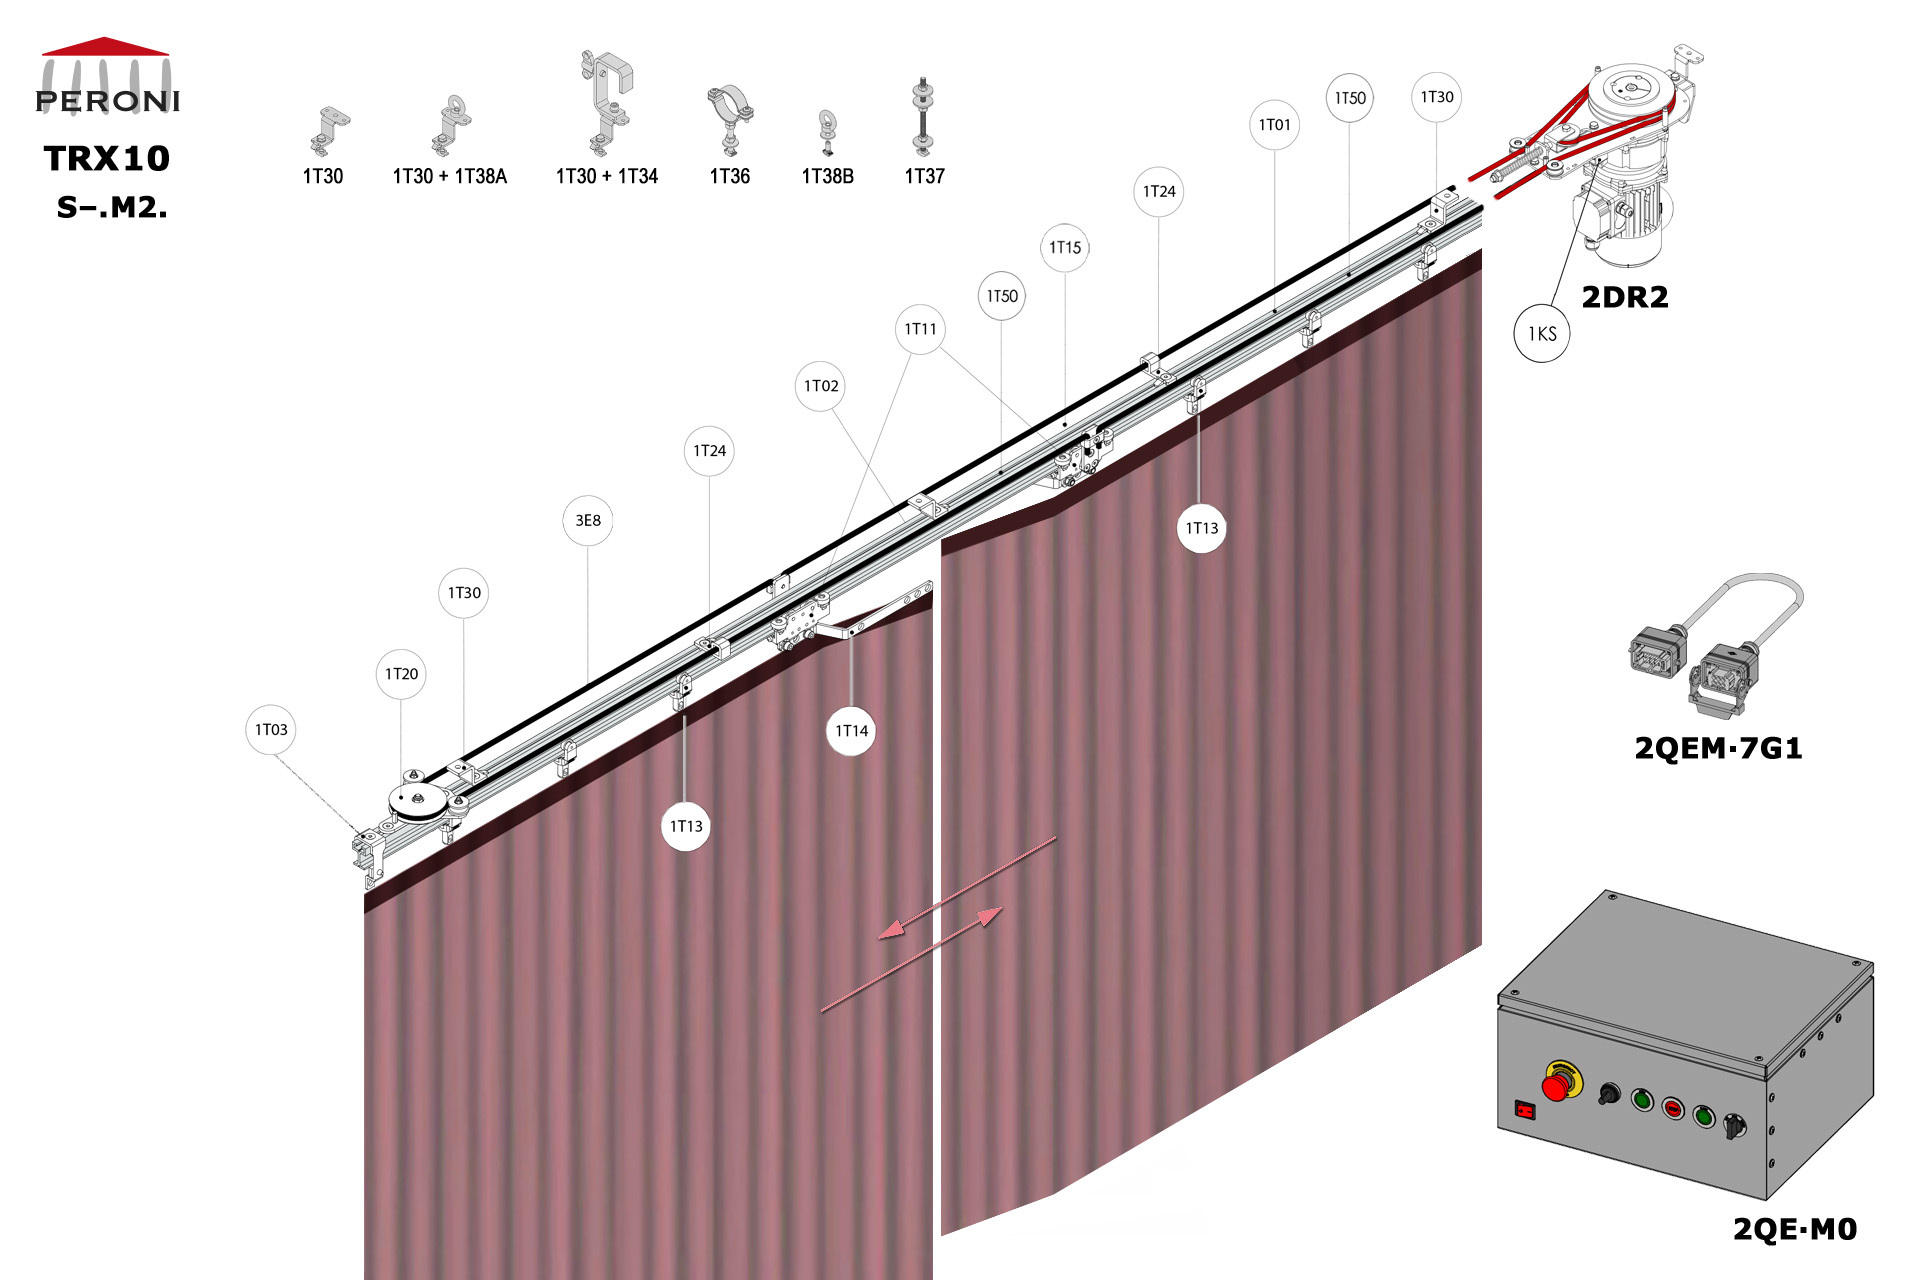 S-.M2. configuration track S-. Straight single rail central openingM2. Motorized, up to 125 kg curtainup to 50 cm central overlapComponents1T01 - Straight rail1T02 - Connection set1T03 - End stop1KS - End stop1T11 - Side cord master carrier1T13 - 2 Wheel runner1T14 - Overlap arms kitMotion control1T20 - Horizontal pulley1T24 - Side cord support1T15 - Limit switch arm for 1T11 + 1T501T50 - Limit switch for 1T11 + 1T152DR2-RDS2QEM-7G1-152QE∙M0 - Panou de comanda M0 3E - Franghie Poly Ø 8 mmFixing1T30 - Suspension bracket1T34 - Hook clamp + bolt1T36 - Collar Ø 50 mm + channel nut